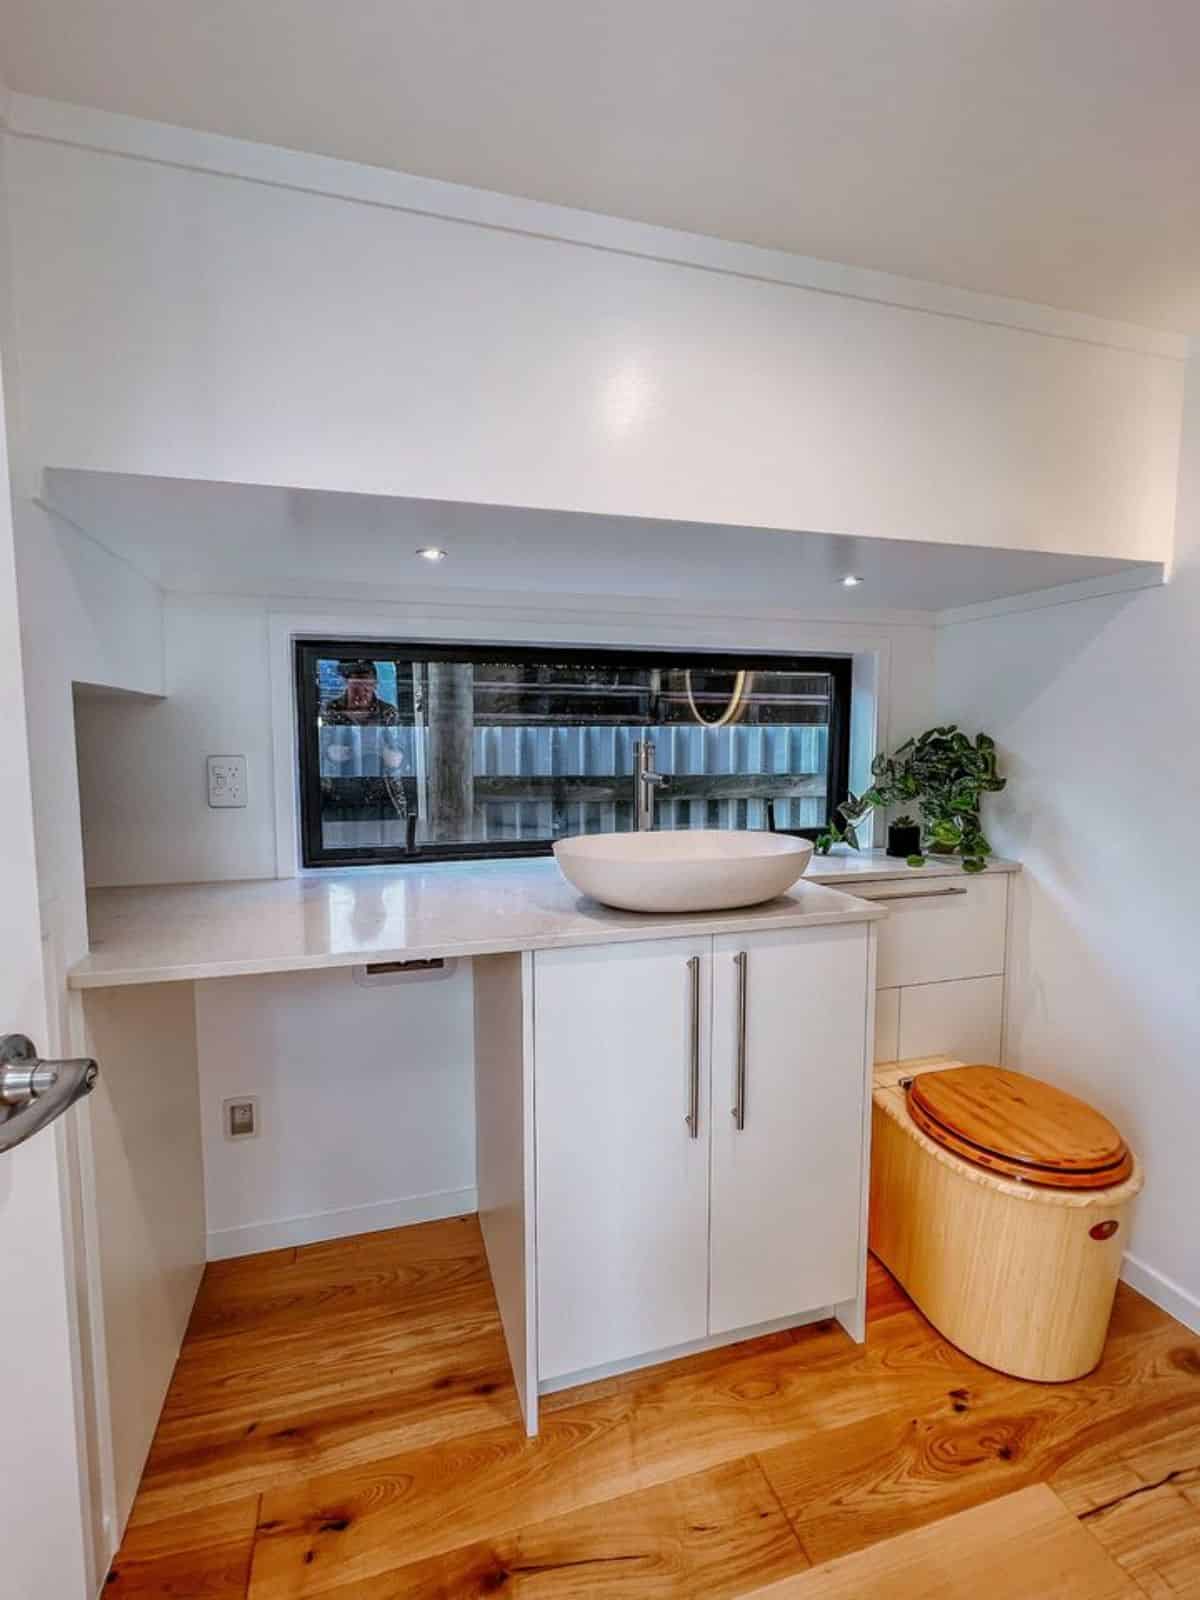 bathroom of 2 bedroom tiny house is stunning with standard toilet, sink with vanity